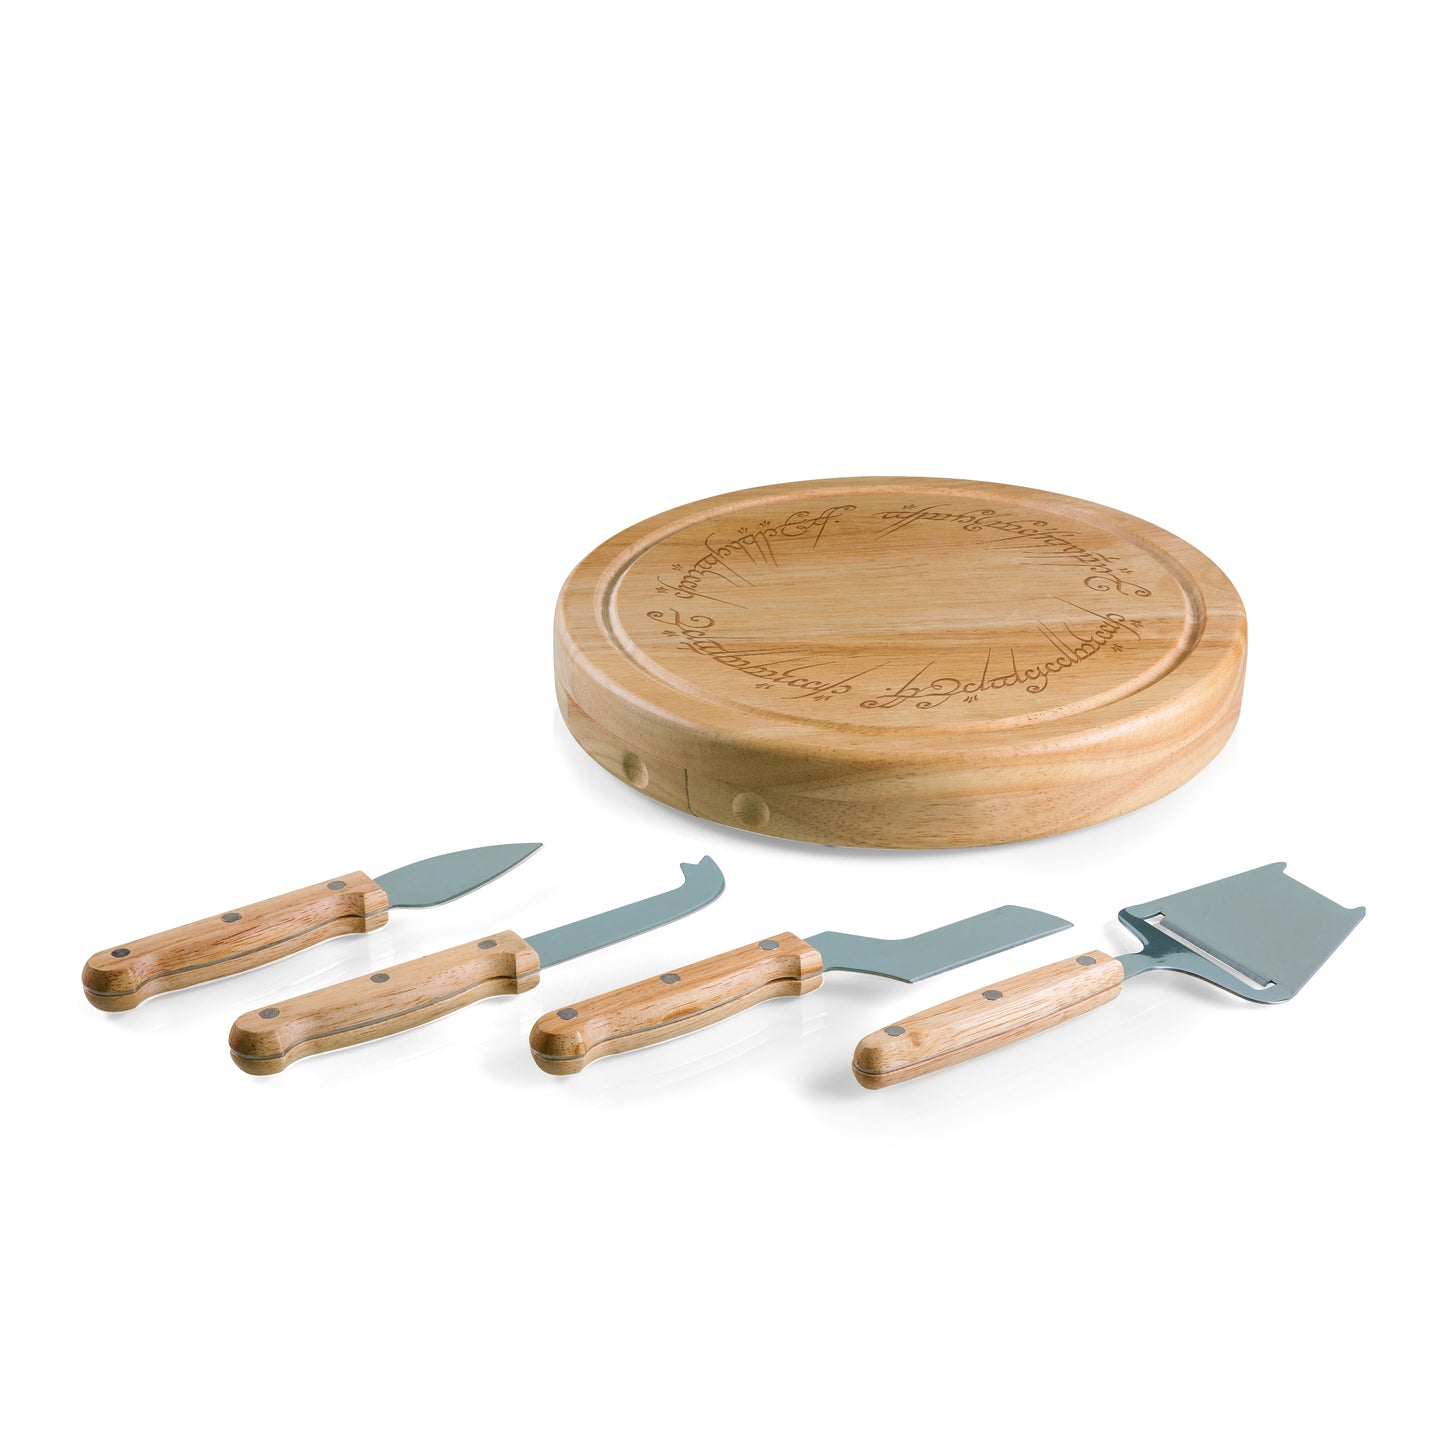 Lord of the Rings Cheese Cutting Board and Tools Set